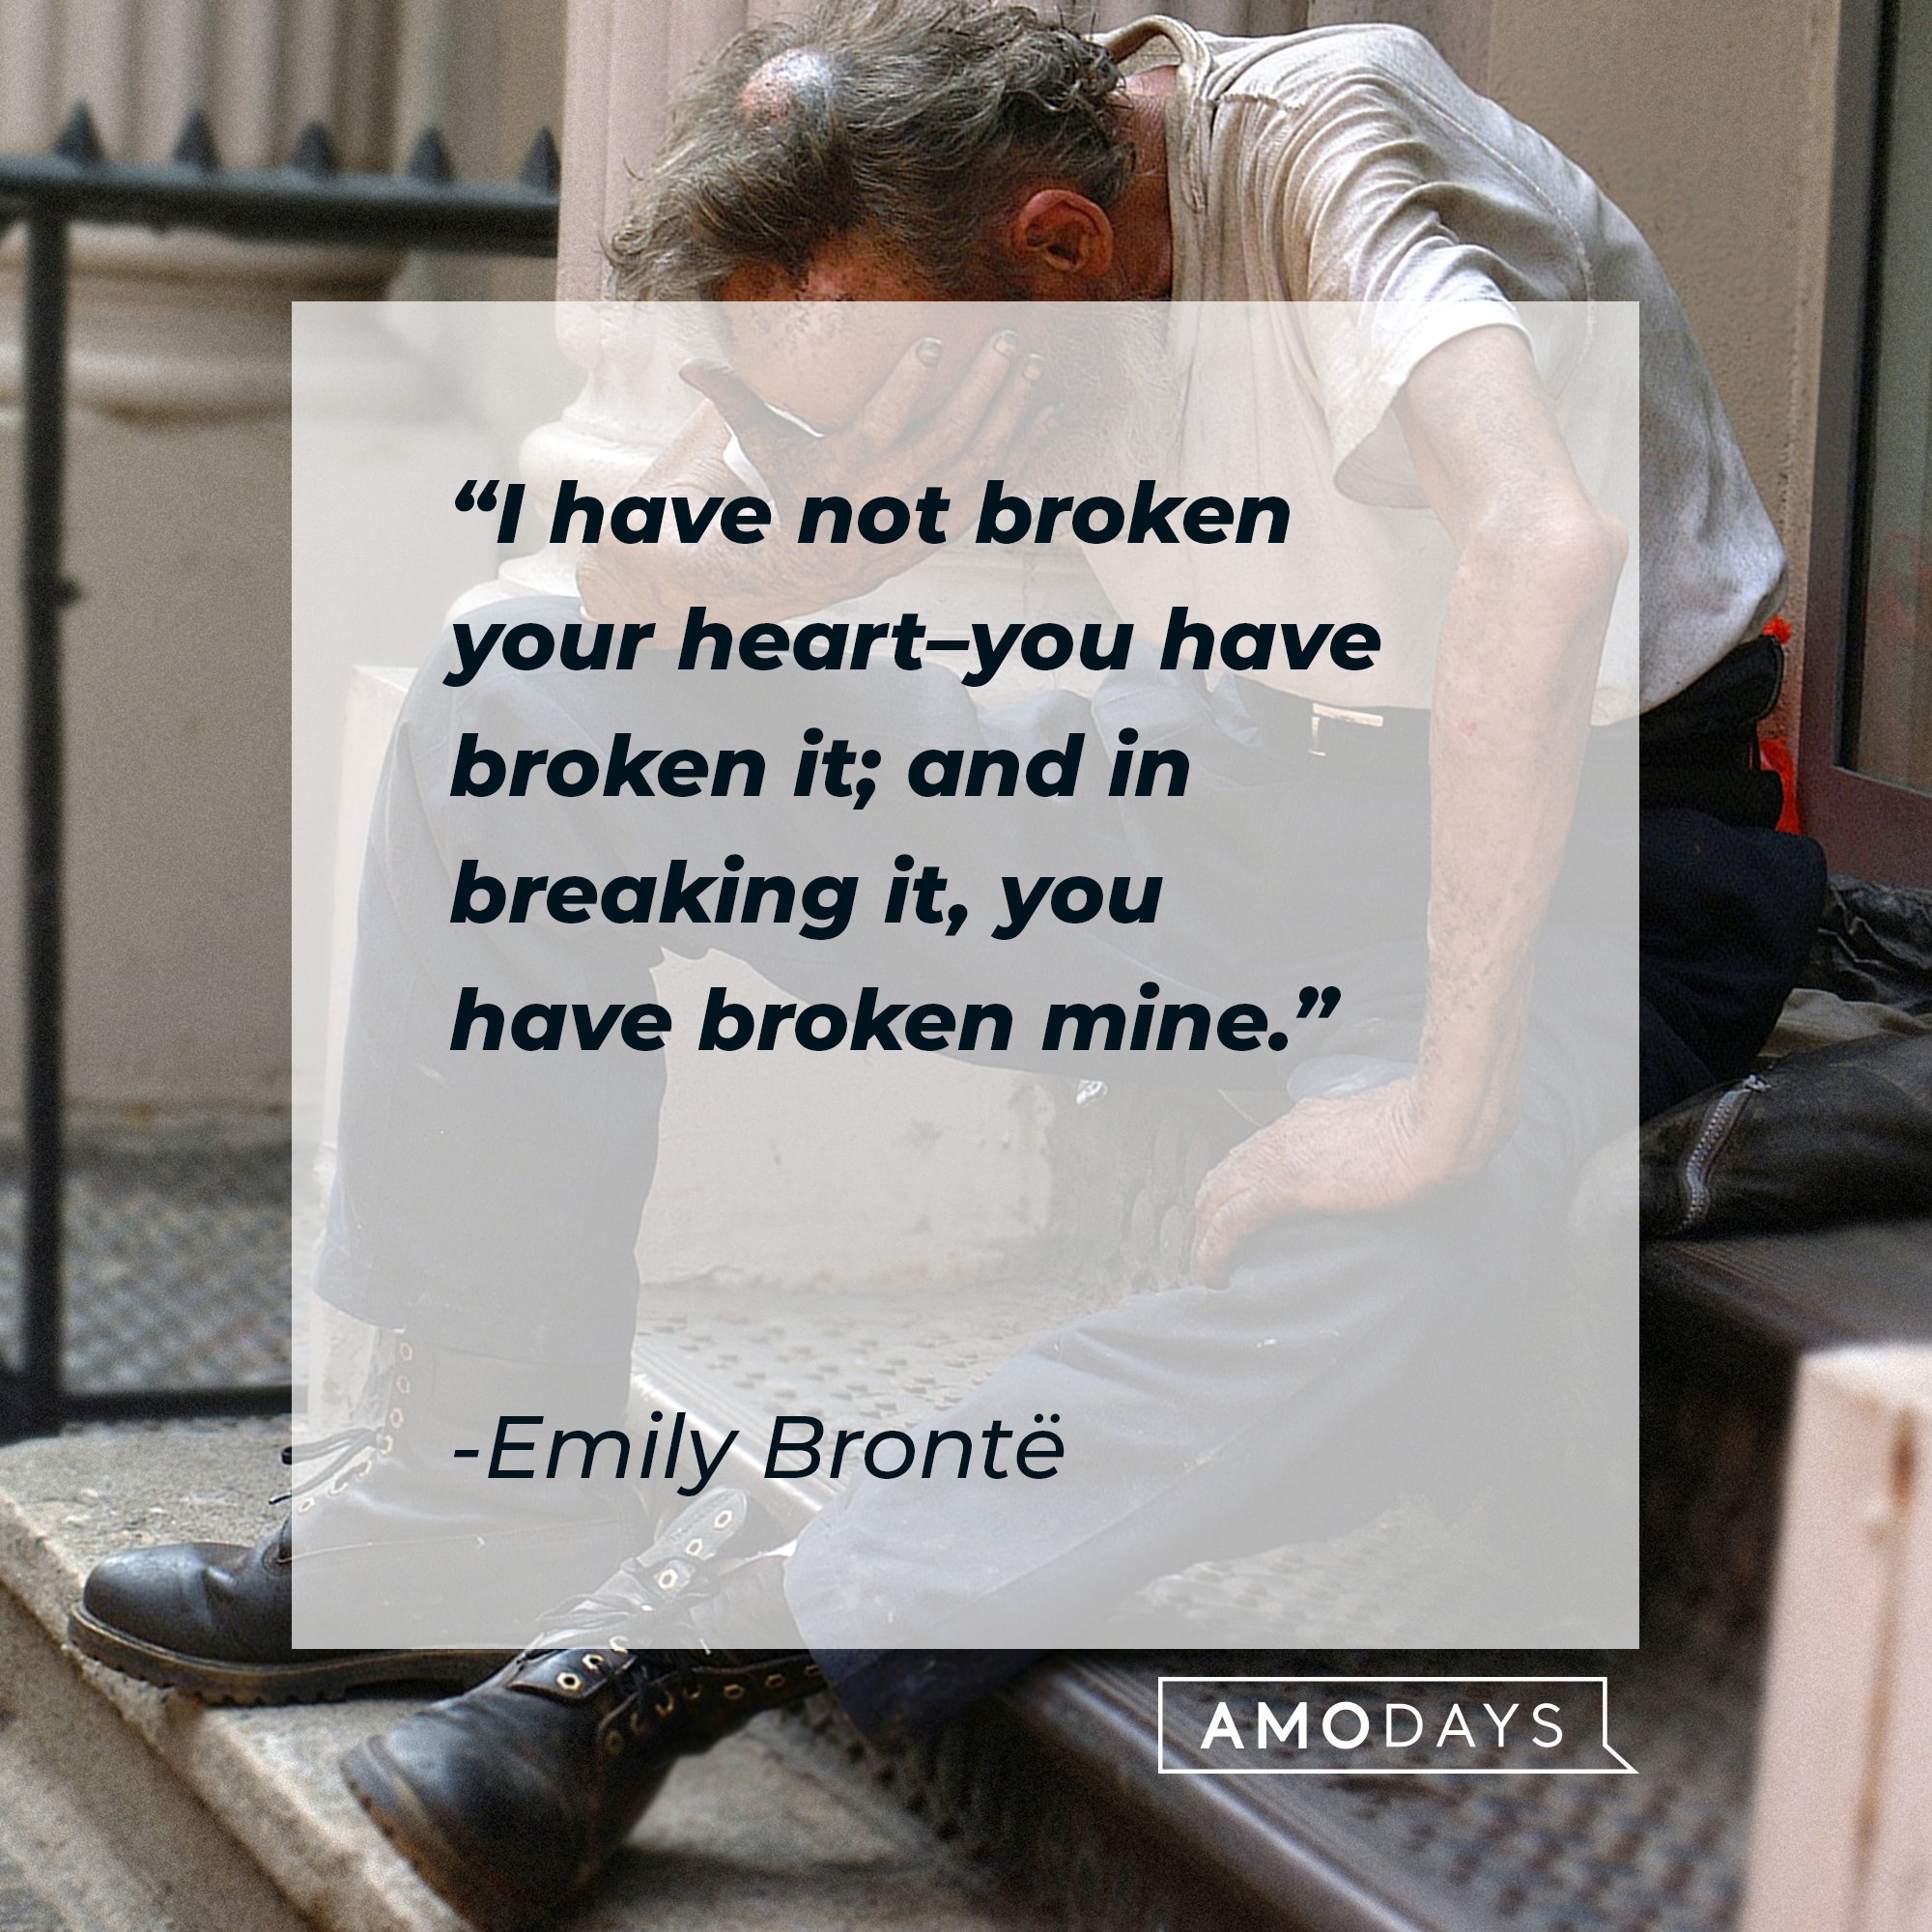 Emily Brontë's quote: "I have not broken your heart–you have broken it; and in breaking it, you have broken mine." | Image: AmoDays